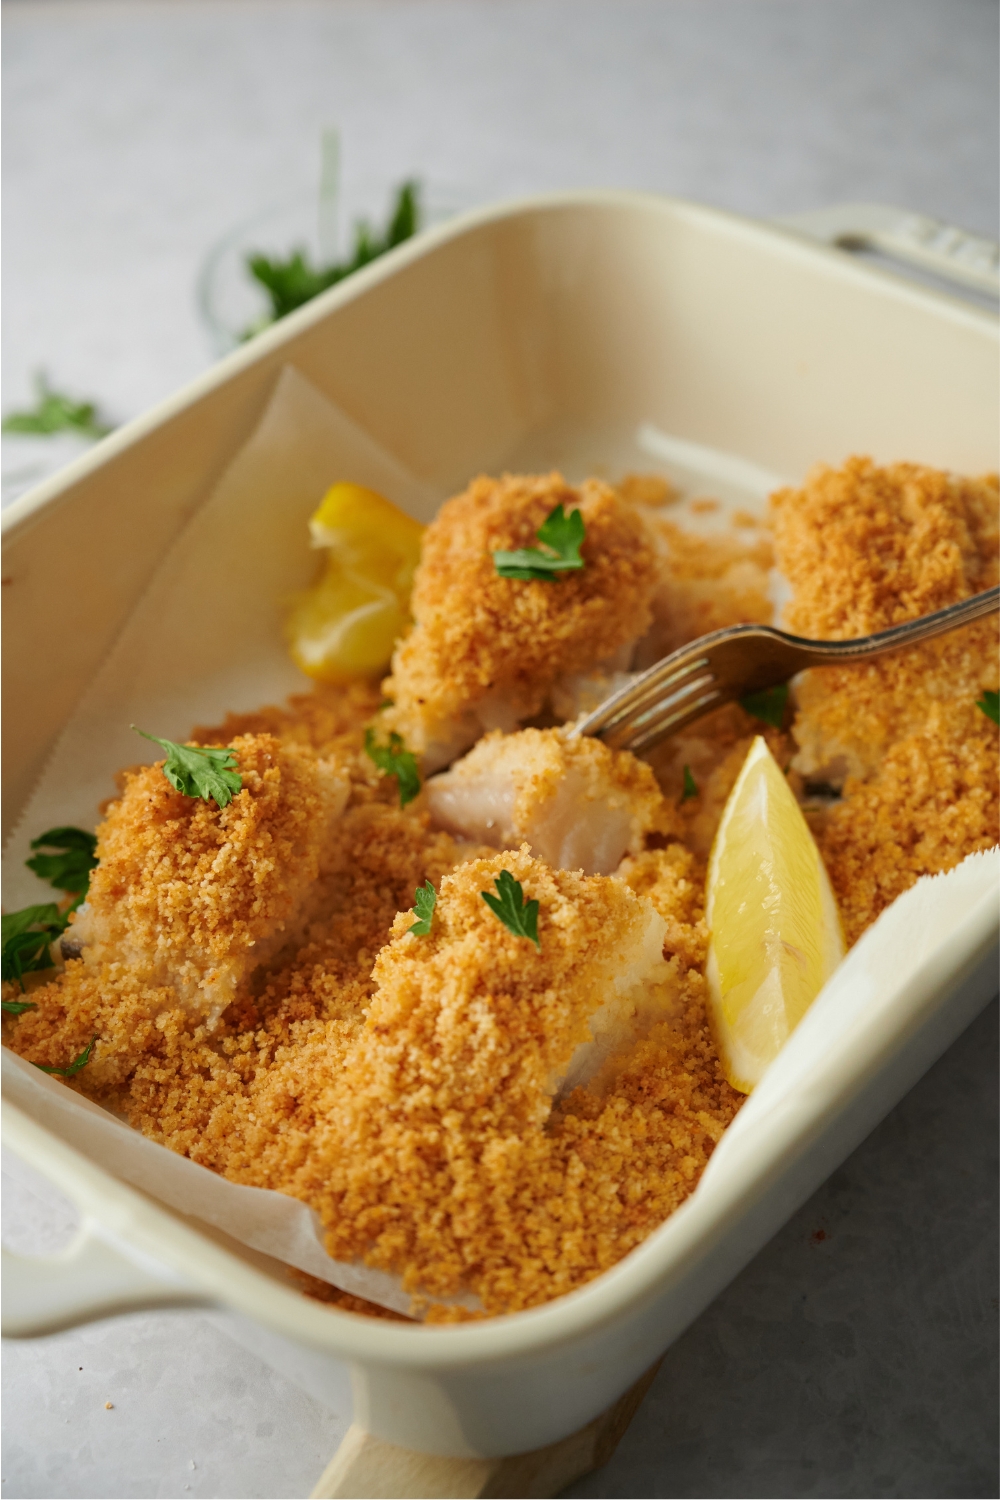 A baking dish filled with breaded haddock fillets. A fork has a piece of the one fillet in the prongs.